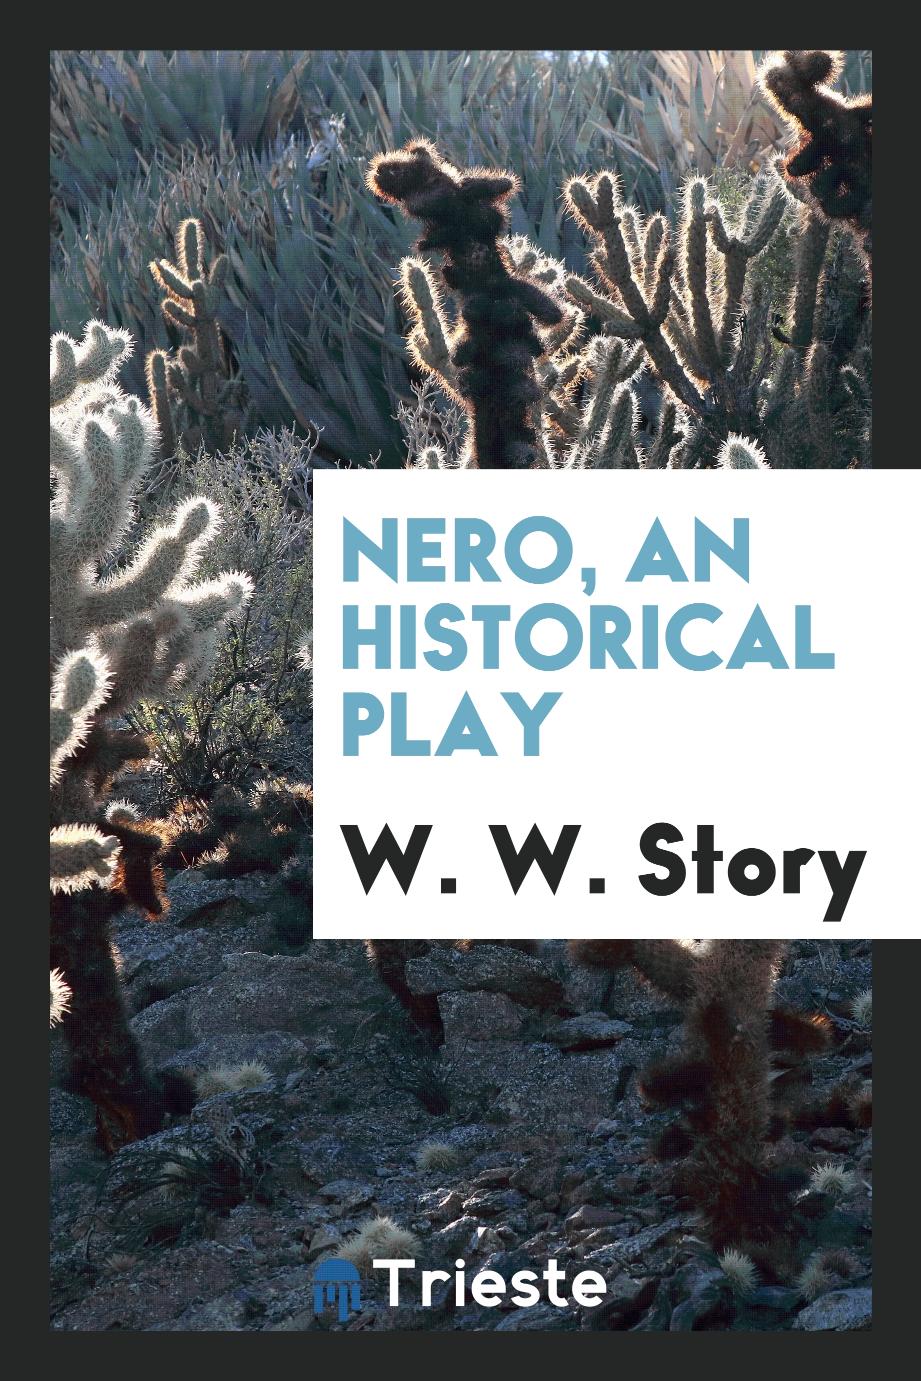 Nero, an historical play